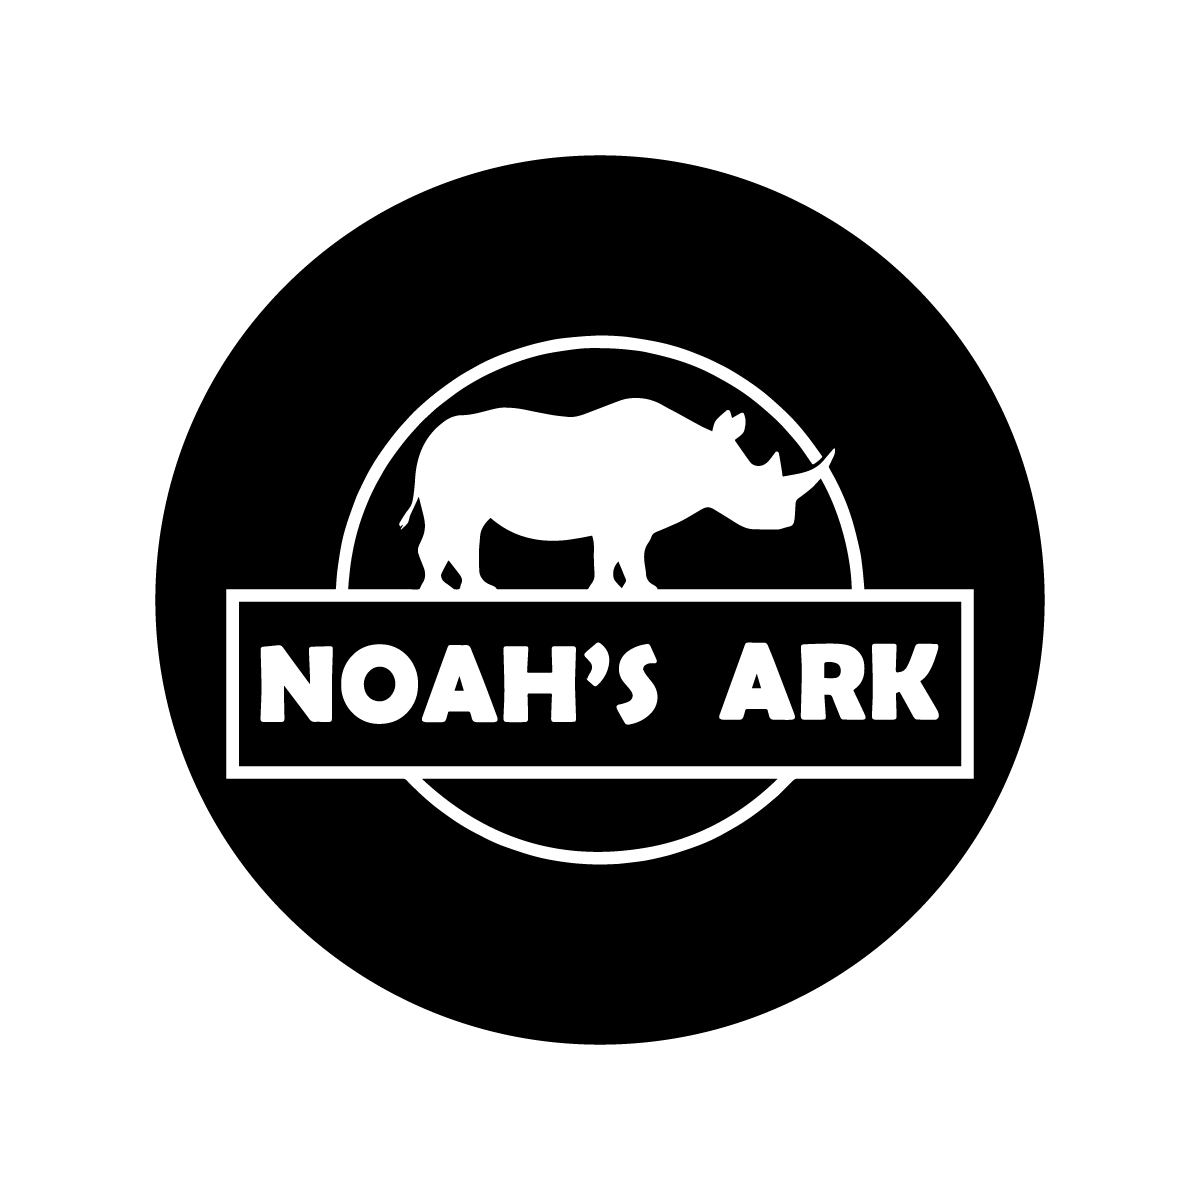 Noah\'s Ark - State-of-the-art animal and ecological conservation park To Be Built To Protect The World's Animals Press Office